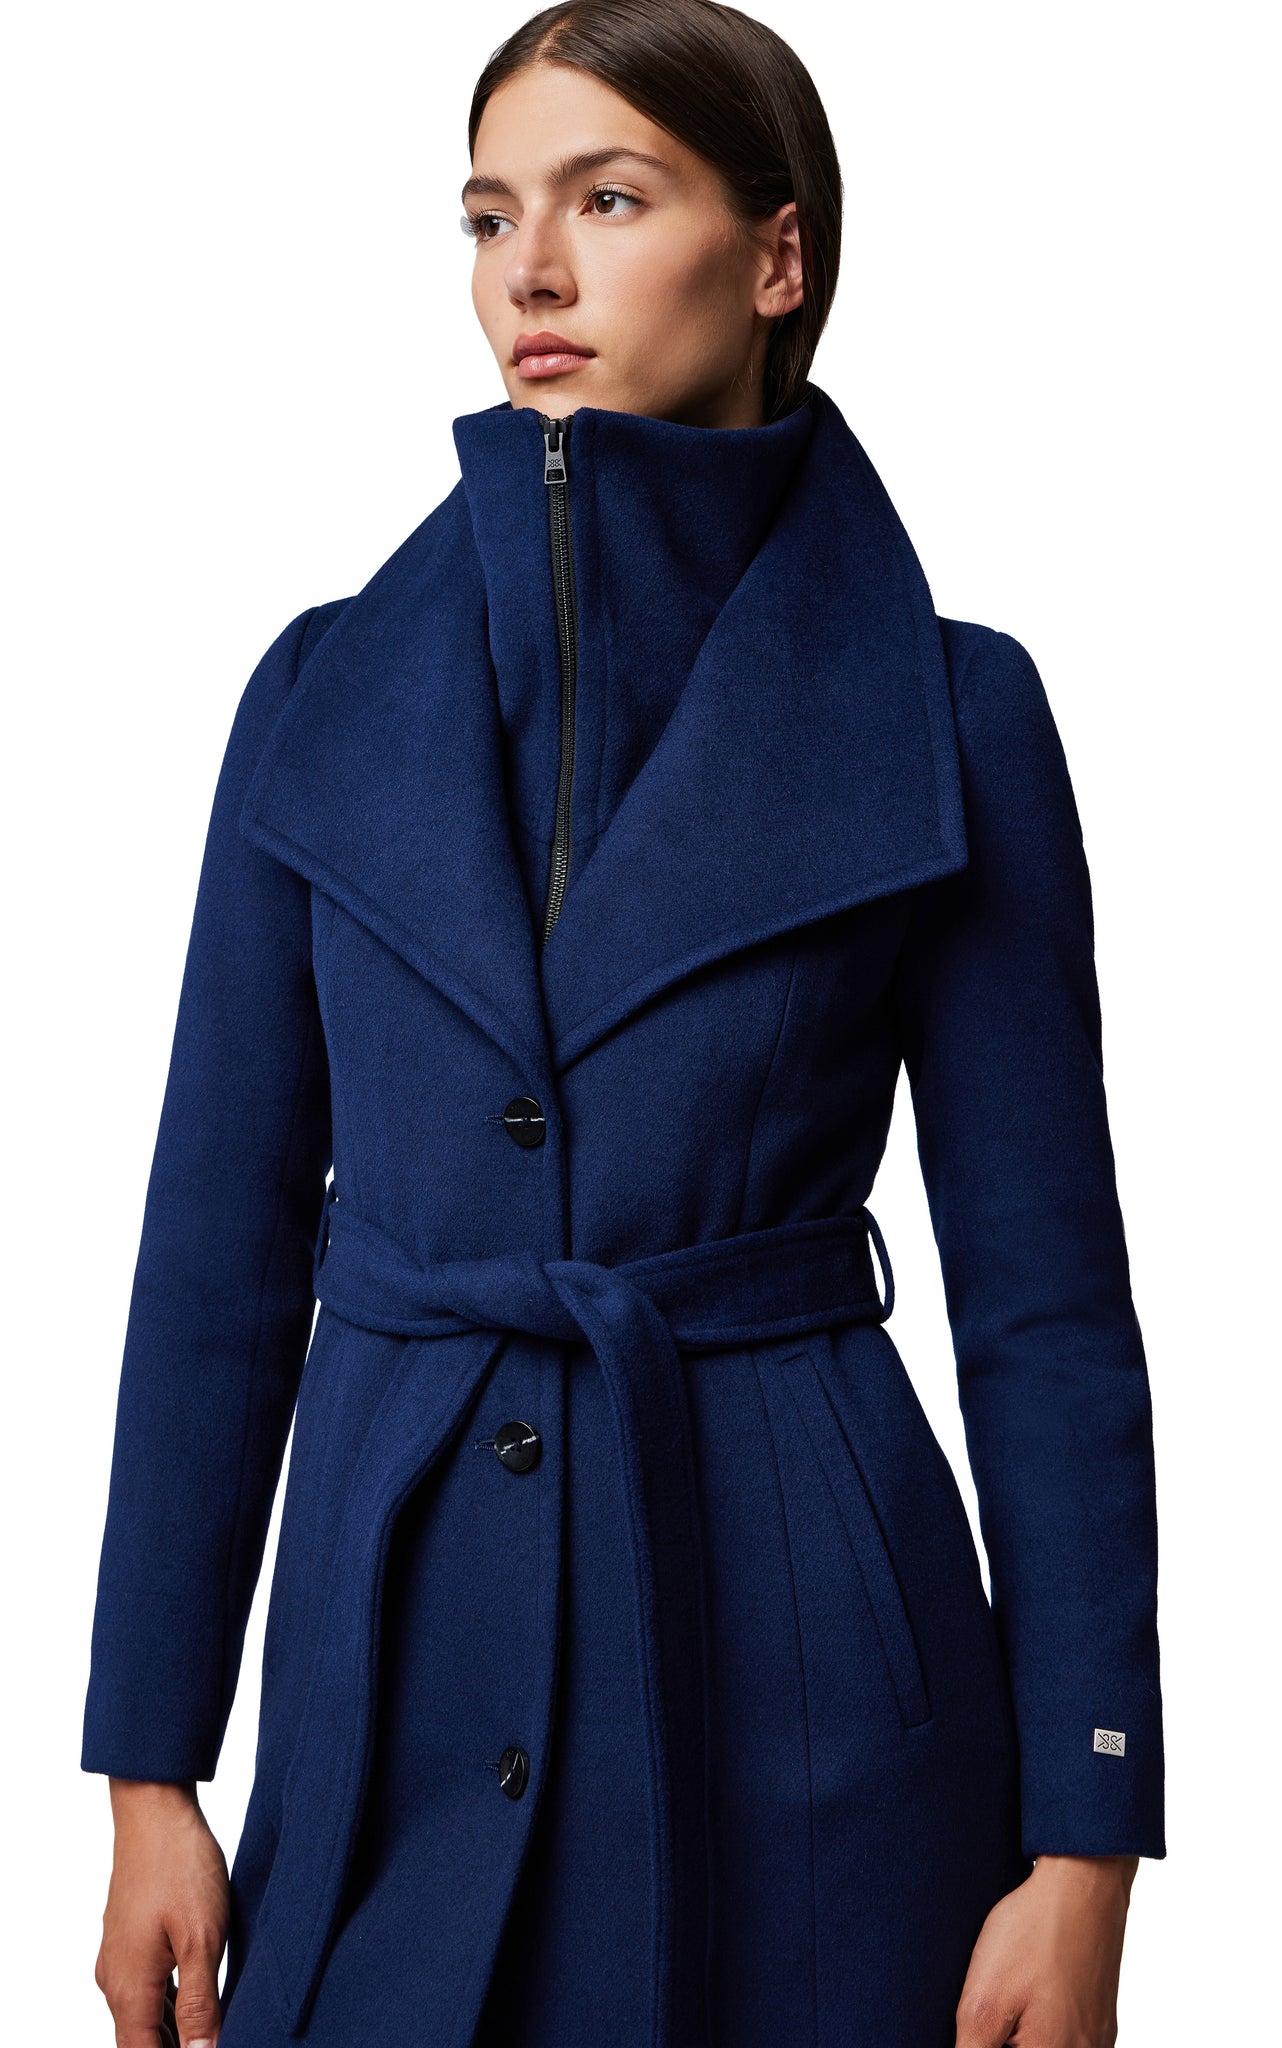 Photo of model wearing Ilana Coat in colour Lapis from Soia & Kyo available at UniKoncept in Waterloo close up